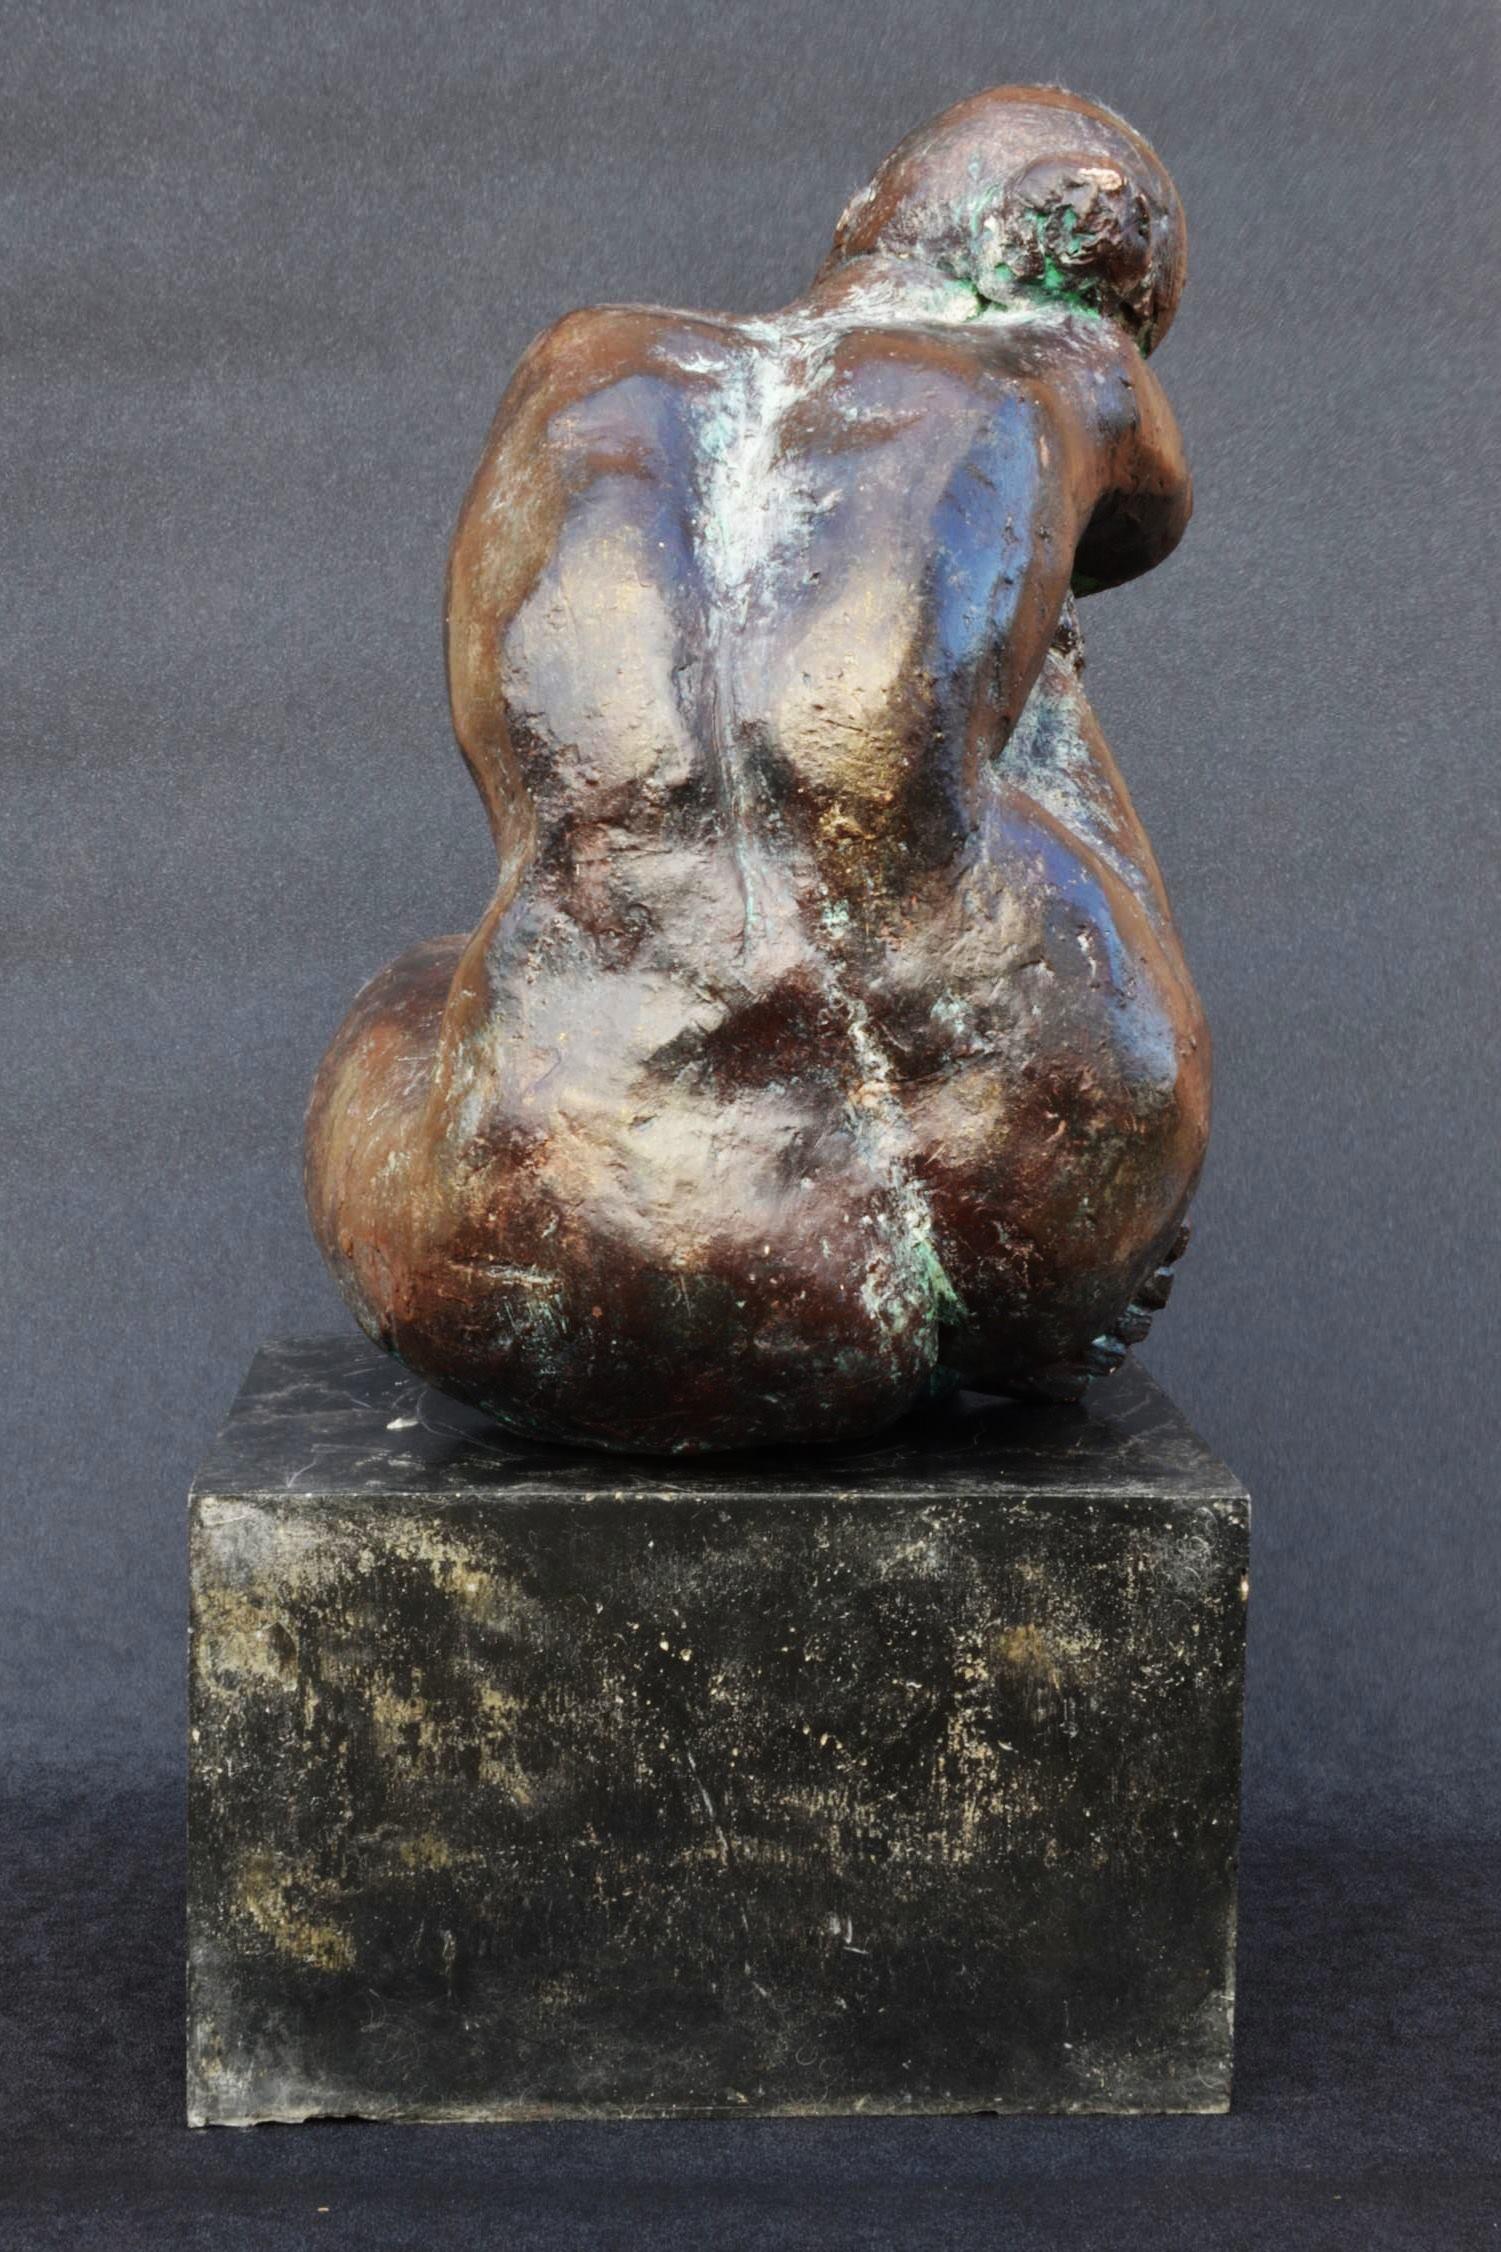 Thought is a bronze sculpture by Yann Guillon of a reflexive woman sitting head on shoulder. This French contemporary artist focuses his work on the human body, using an expressionist approach to convey alternately strength or sensuality. 